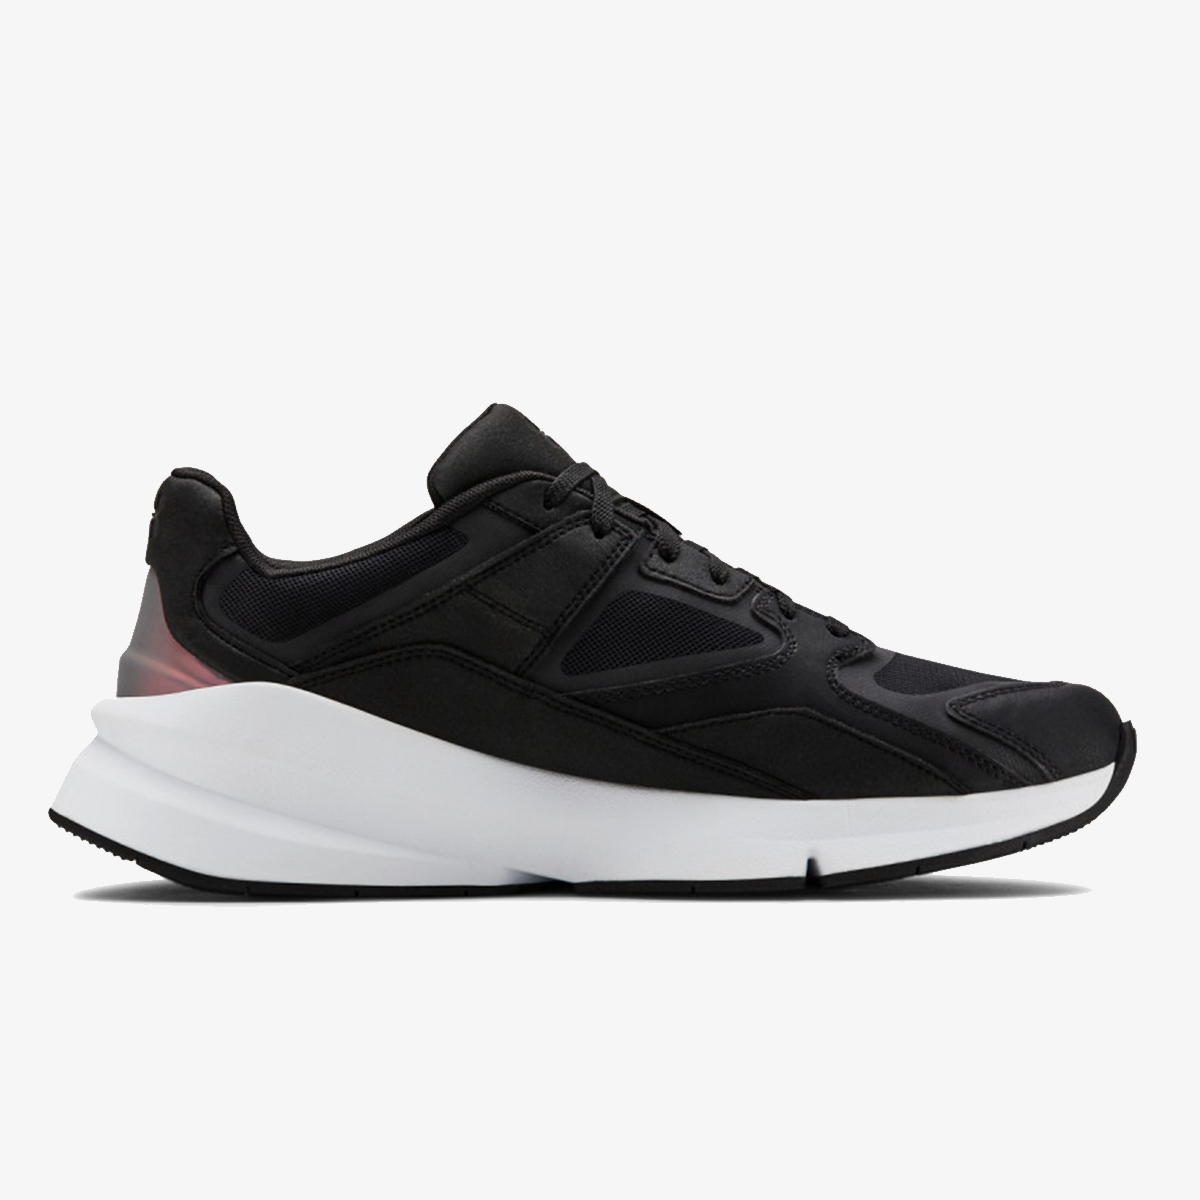 Under Armour UA Forge 96 CLRSHFT 